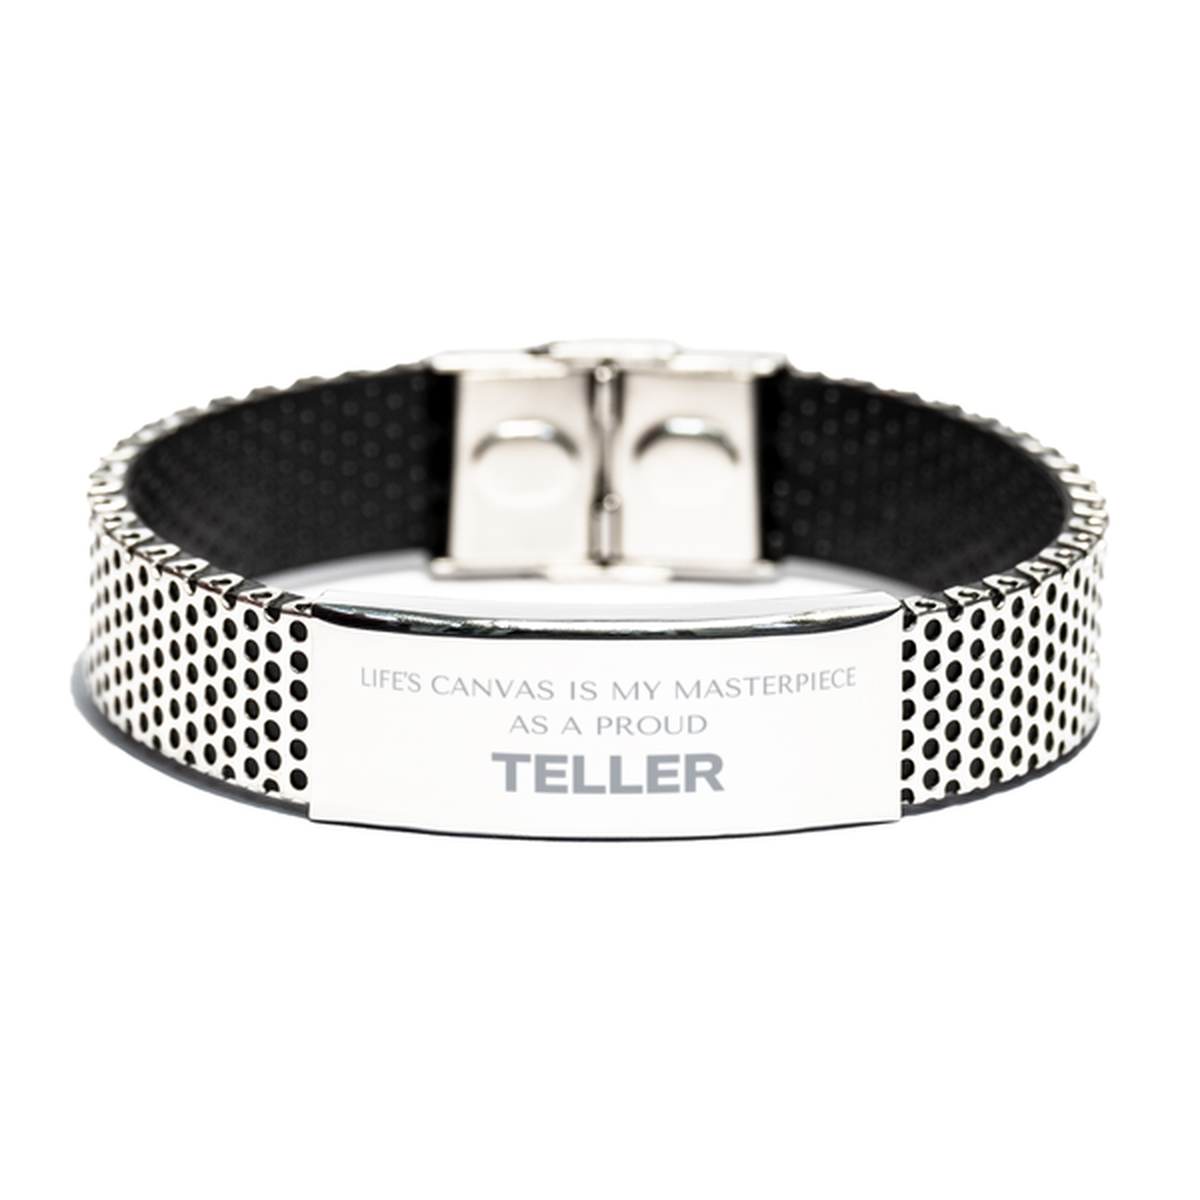 Proud Teller Gifts, Life's canvas is my masterpiece, Epic Birthday Christmas Unique Stainless Steel Bracelet For Teller, Coworkers, Men, Women, Friends